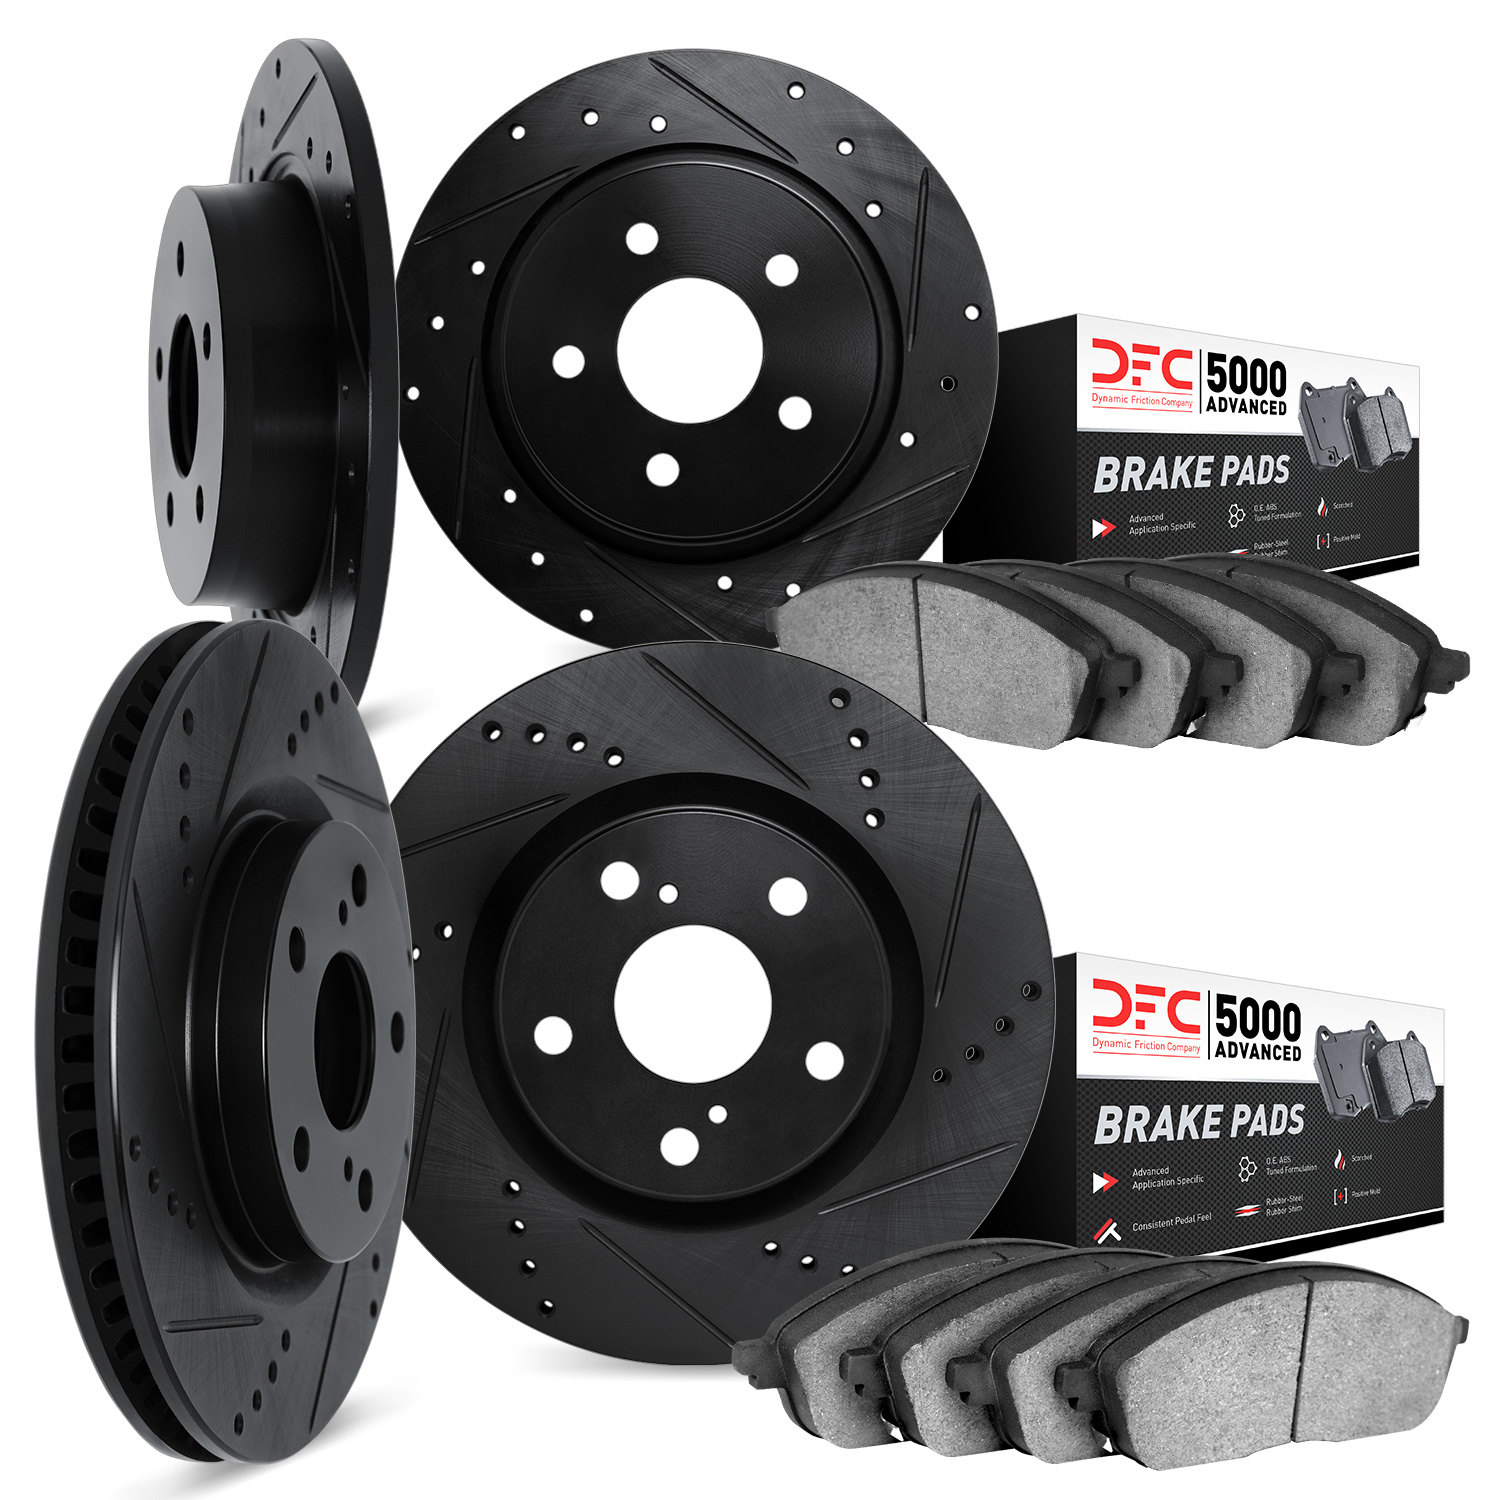 8504-27014 Drilled/Slotted Brake Rotors w/5000 Advanced Brake Pads Kit [Black], 2018-2020 Volvo, Position: Front and Rear